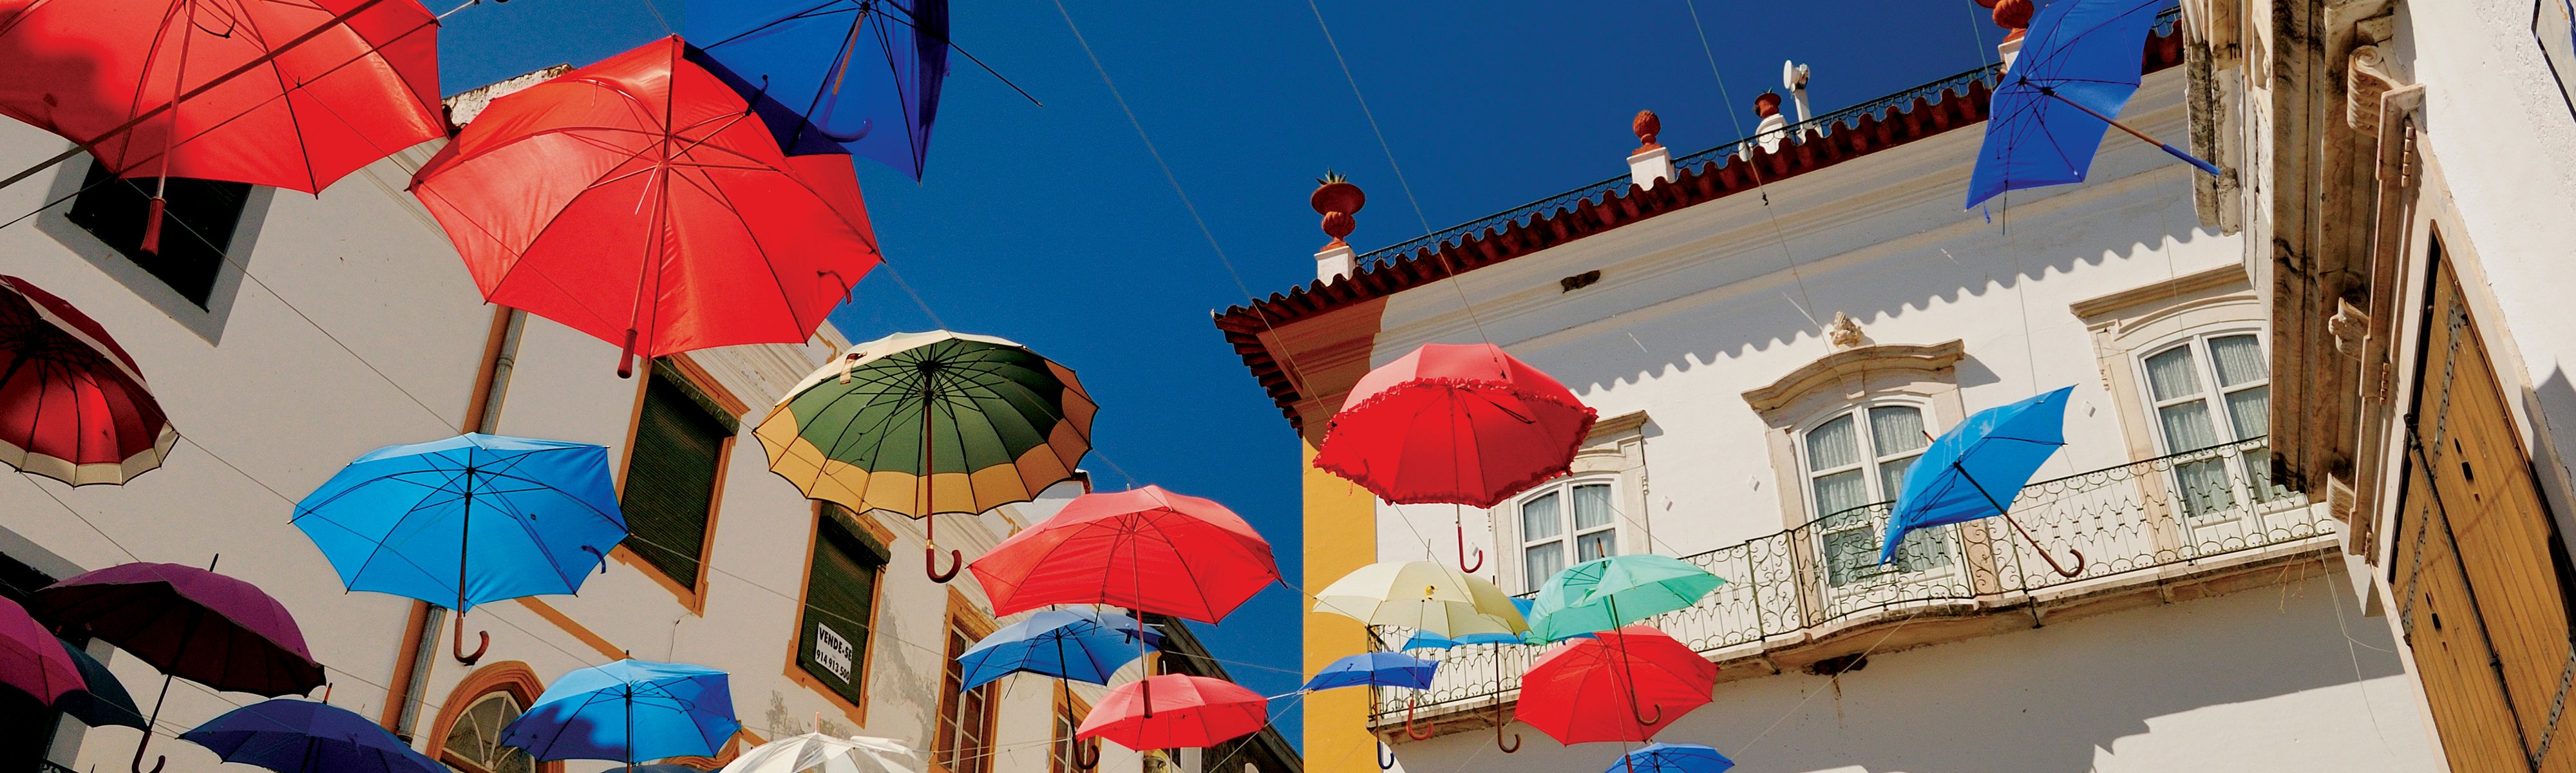 colorful umbrellas handing from buildings in portugal